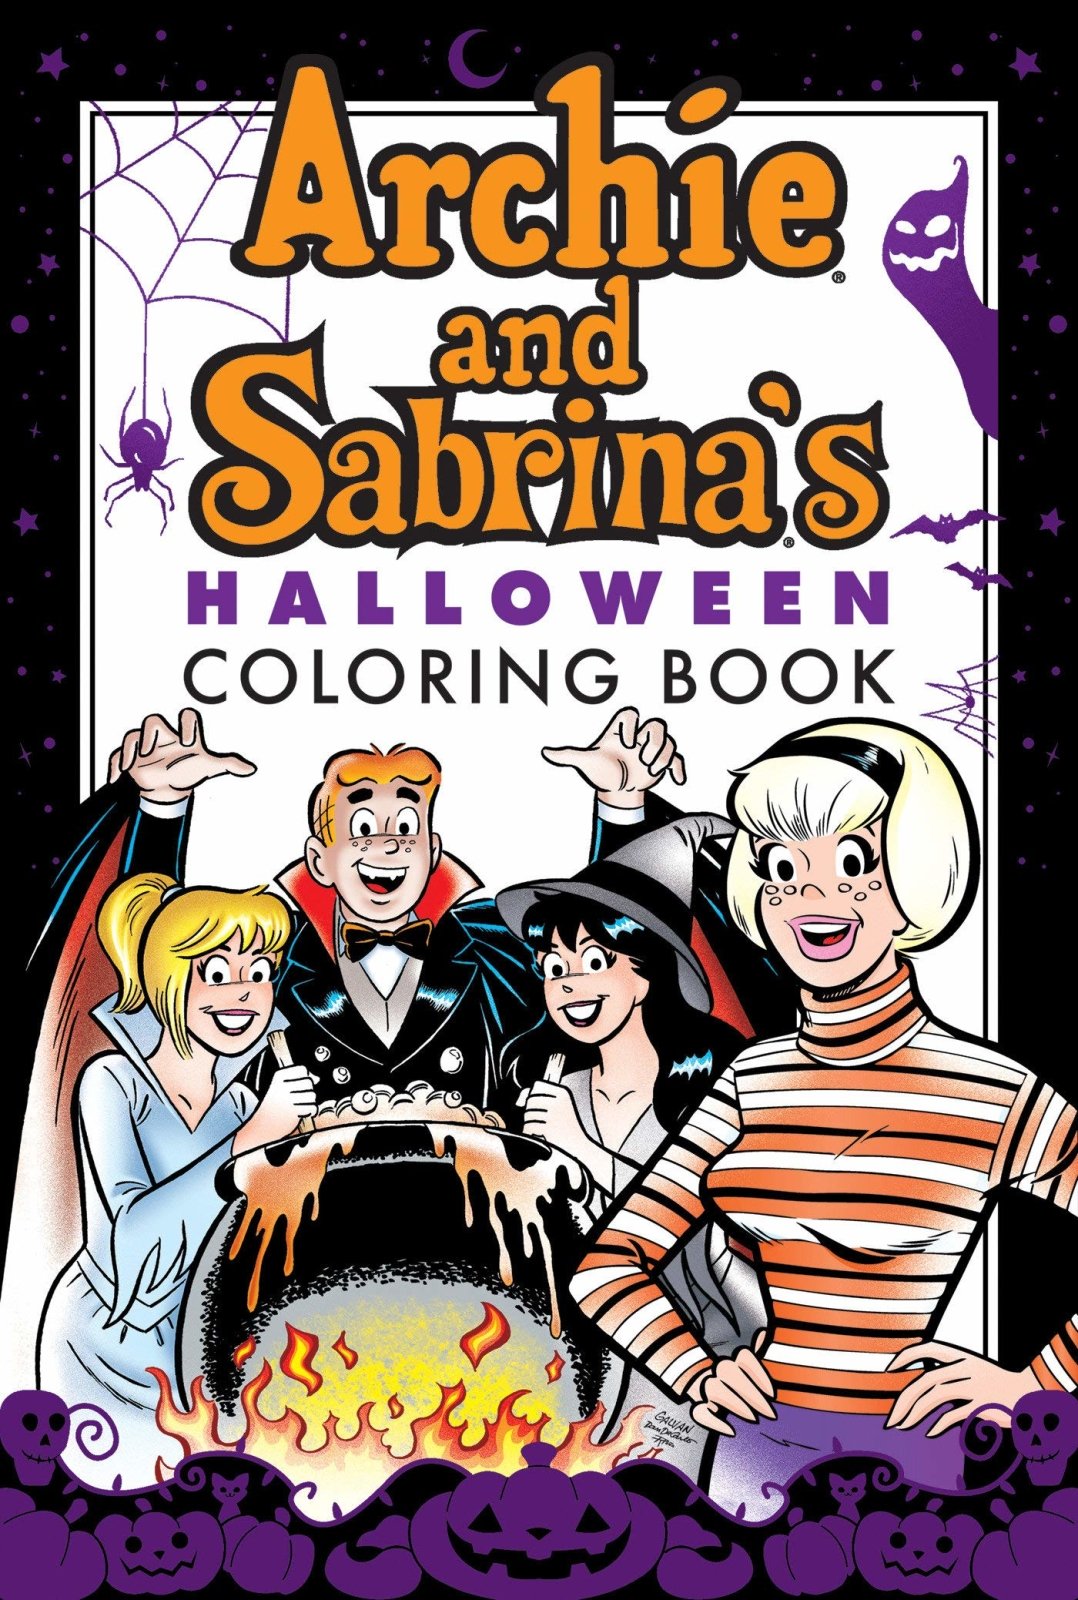 Archie and Sabrina's Halloween Coloring Book - The Fourth Place